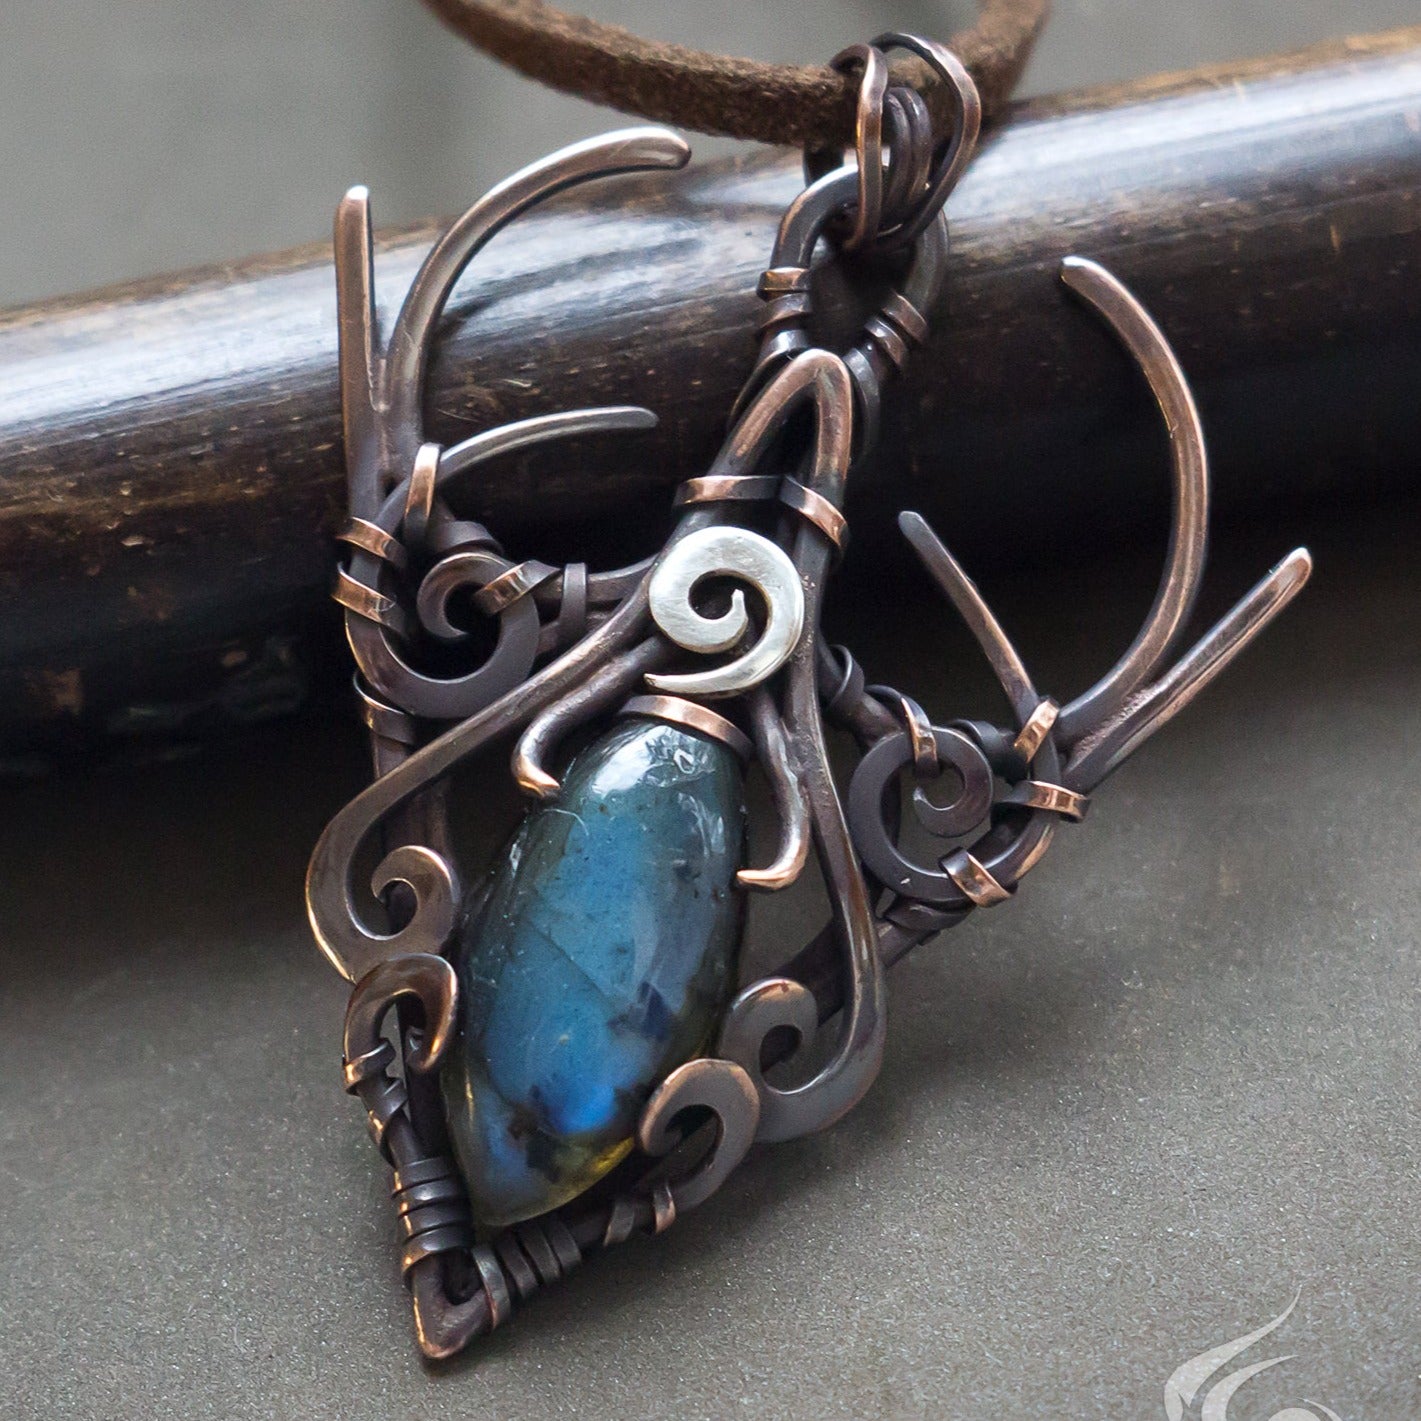 his unique and one of a kind fairy elven necklace was made in wire wrap technique from pure copper and natural light blue amazonite. This gothic elven dainty crescent moon lunula elven talisman jewelry necklace pendant 